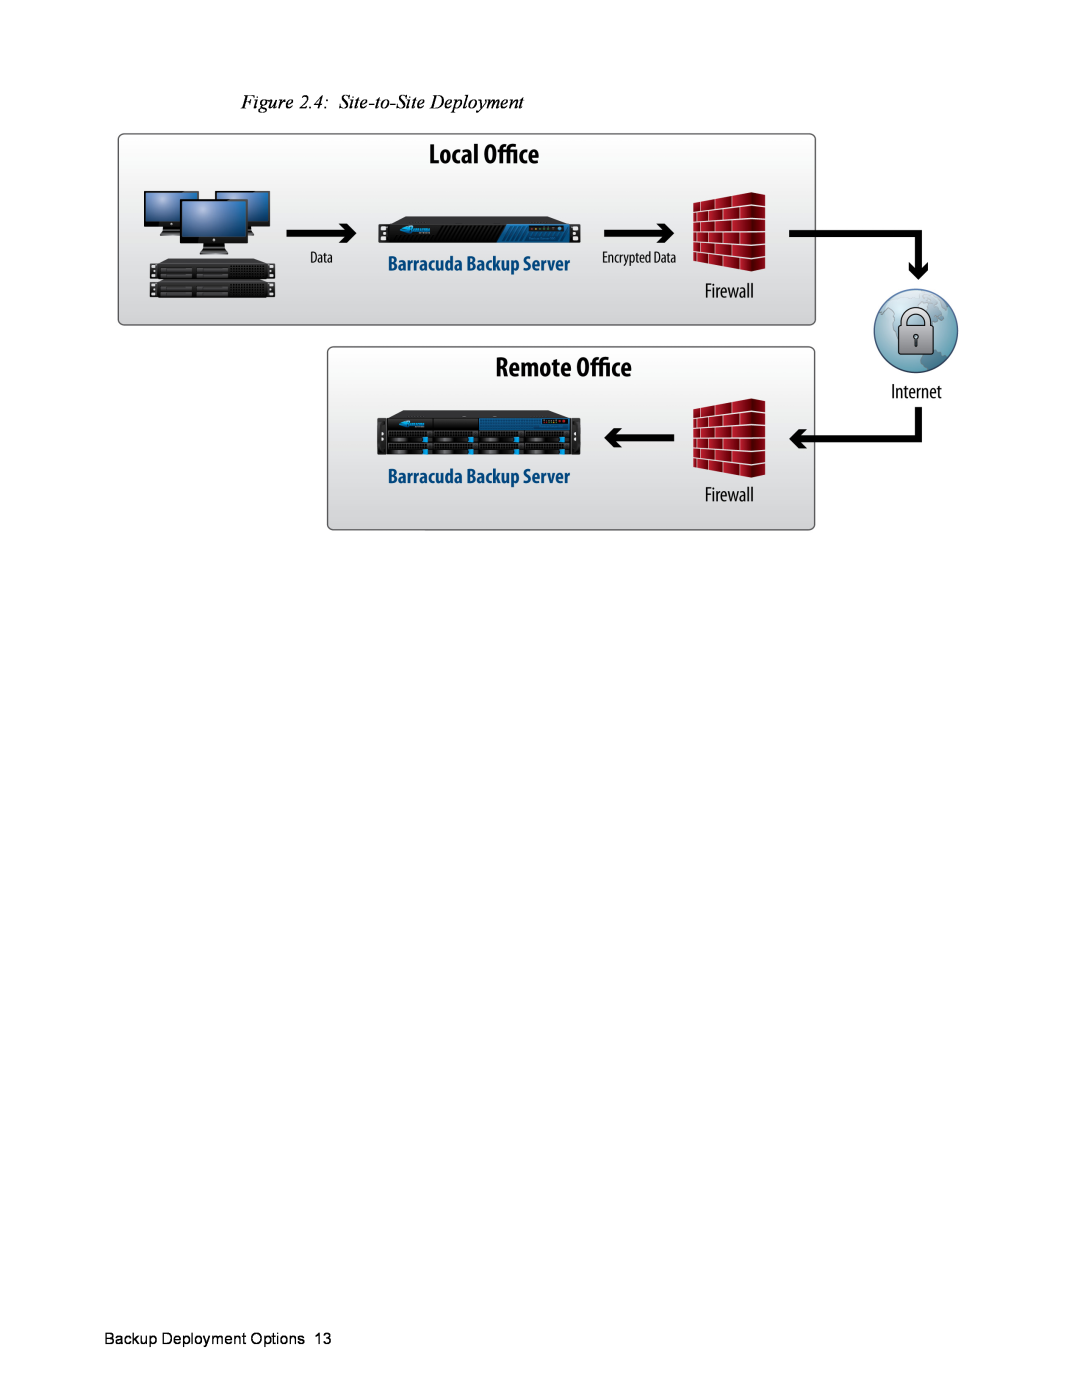 Barracuda Networks manual 4 Site-to-Site Deployment, Backup Deployment Options 